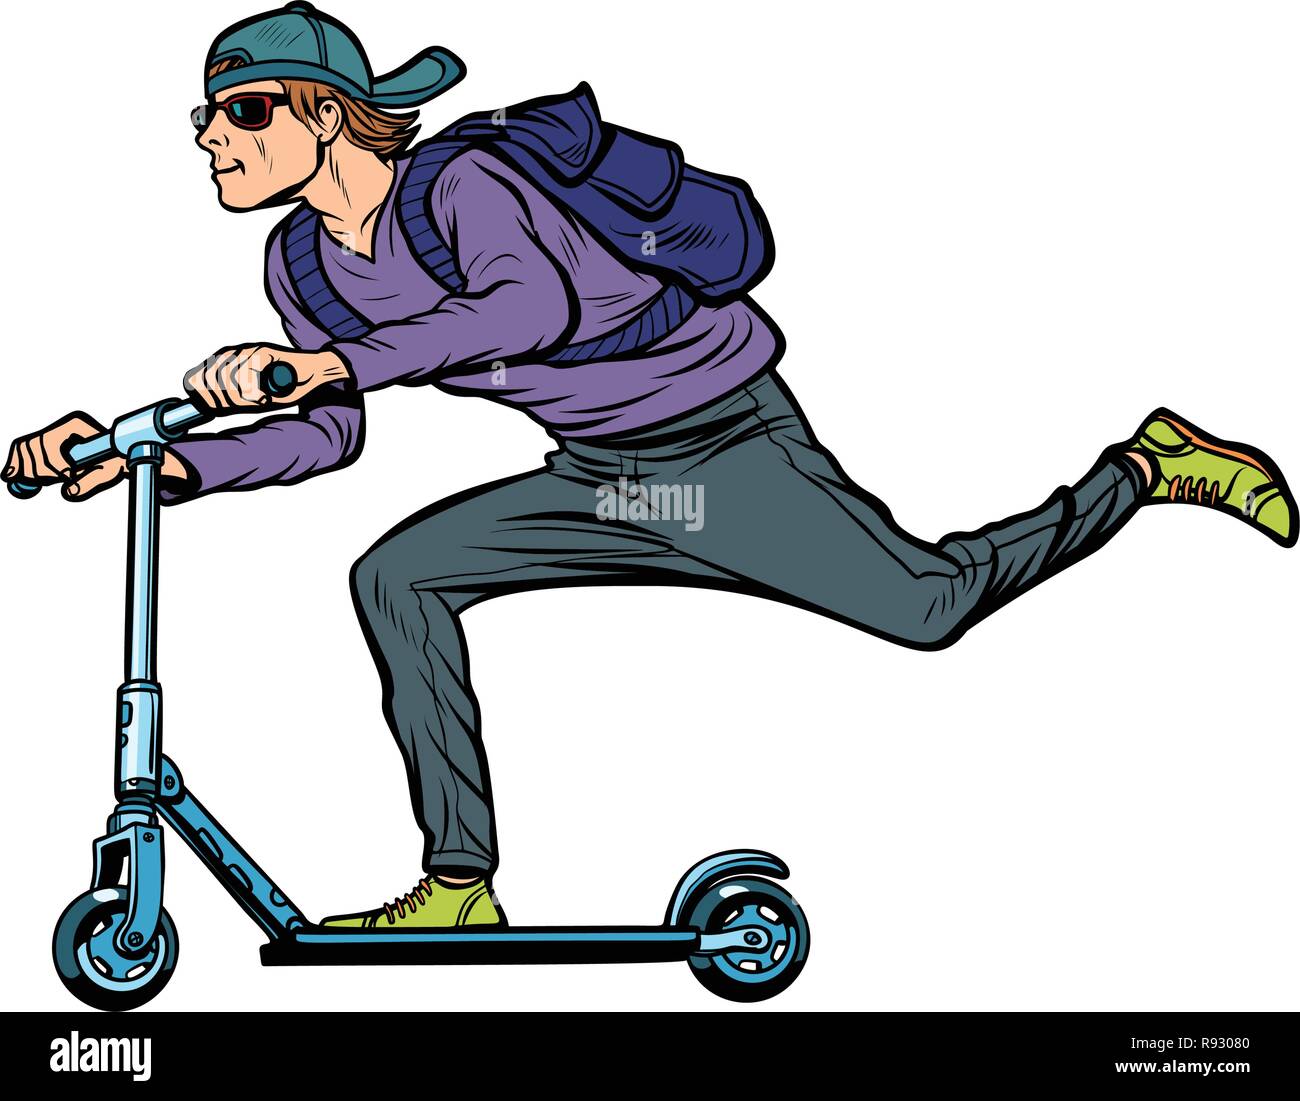 fashionable young man on a scooter, action sports. Pop art retro vector illustration vintage kitsch Stock Vector